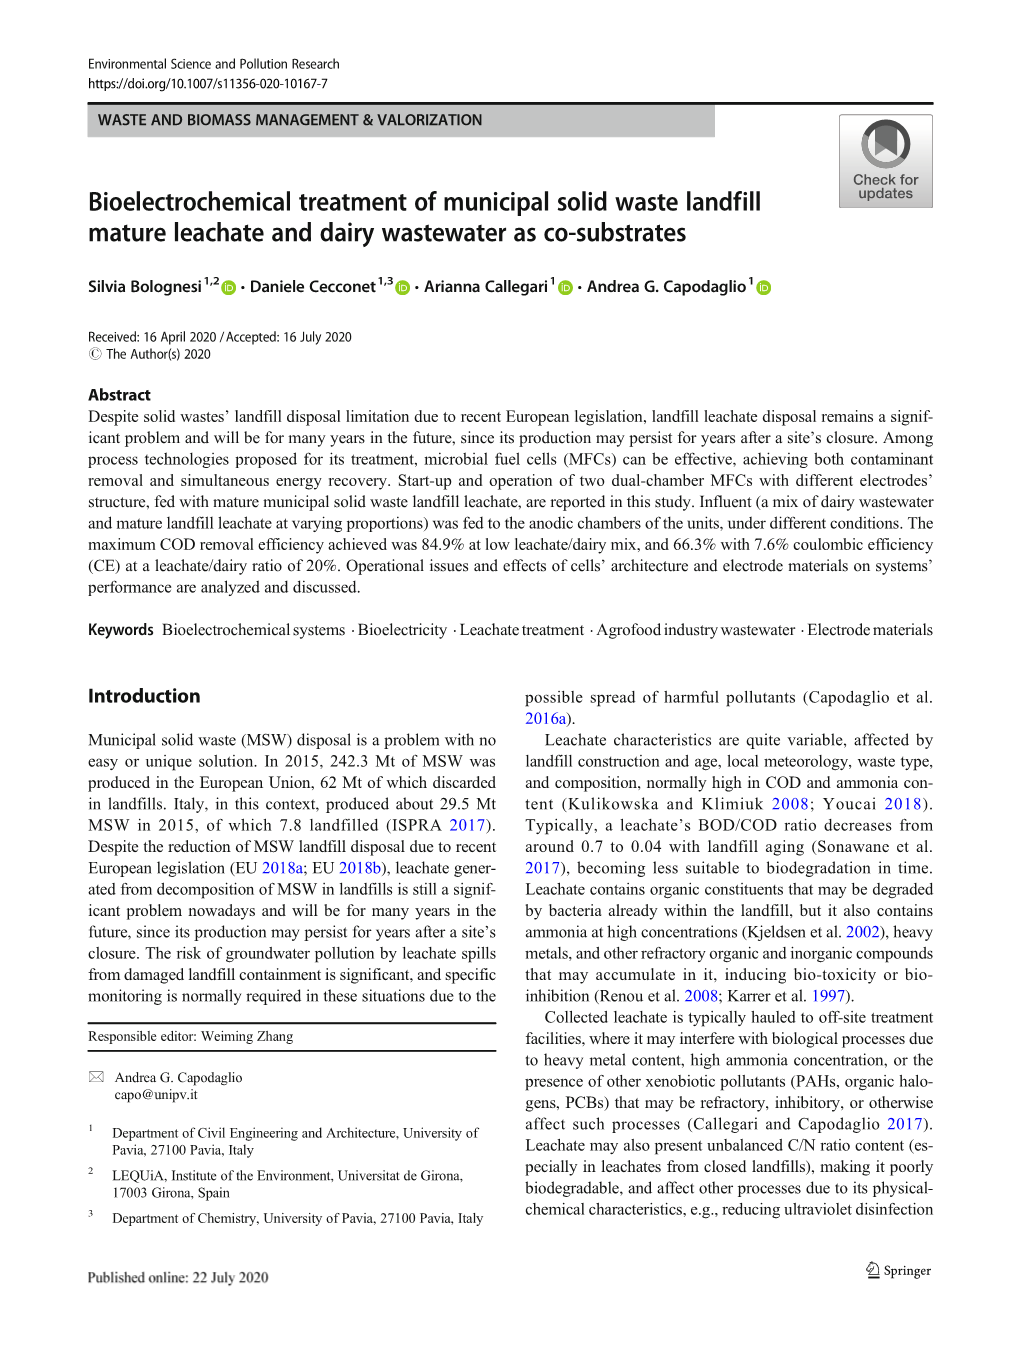 Bioelectrochemical Treatment of Municipal Solid Waste Landfill Mature Leachate and Dairy Wastewater As Co-Substrates